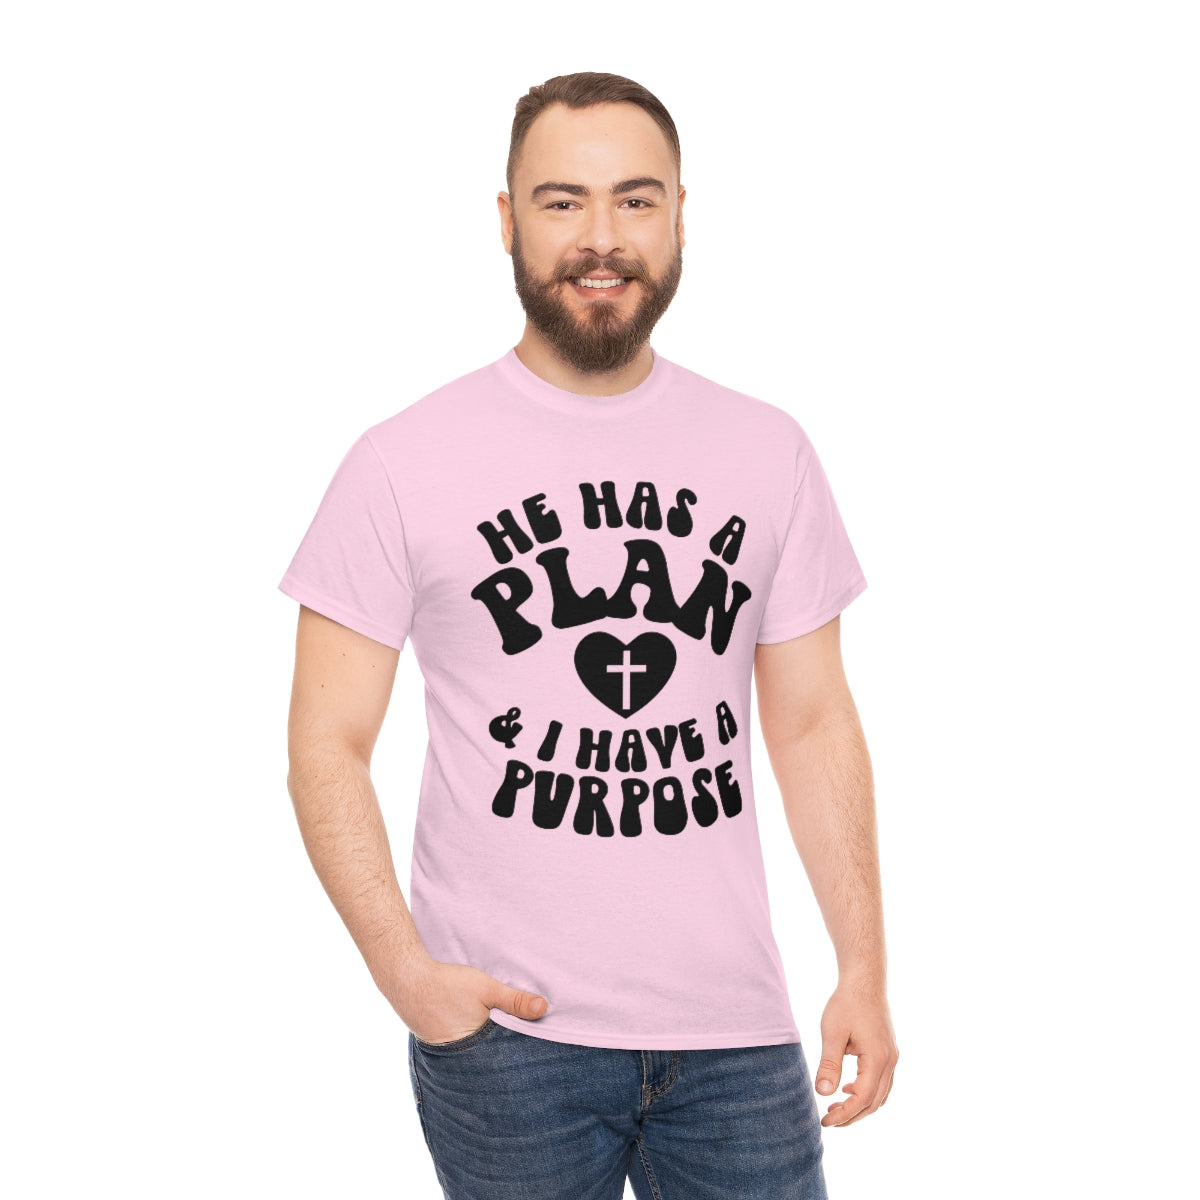 He has a plan and I have a purpose Unisex Heavy Cotton Tee